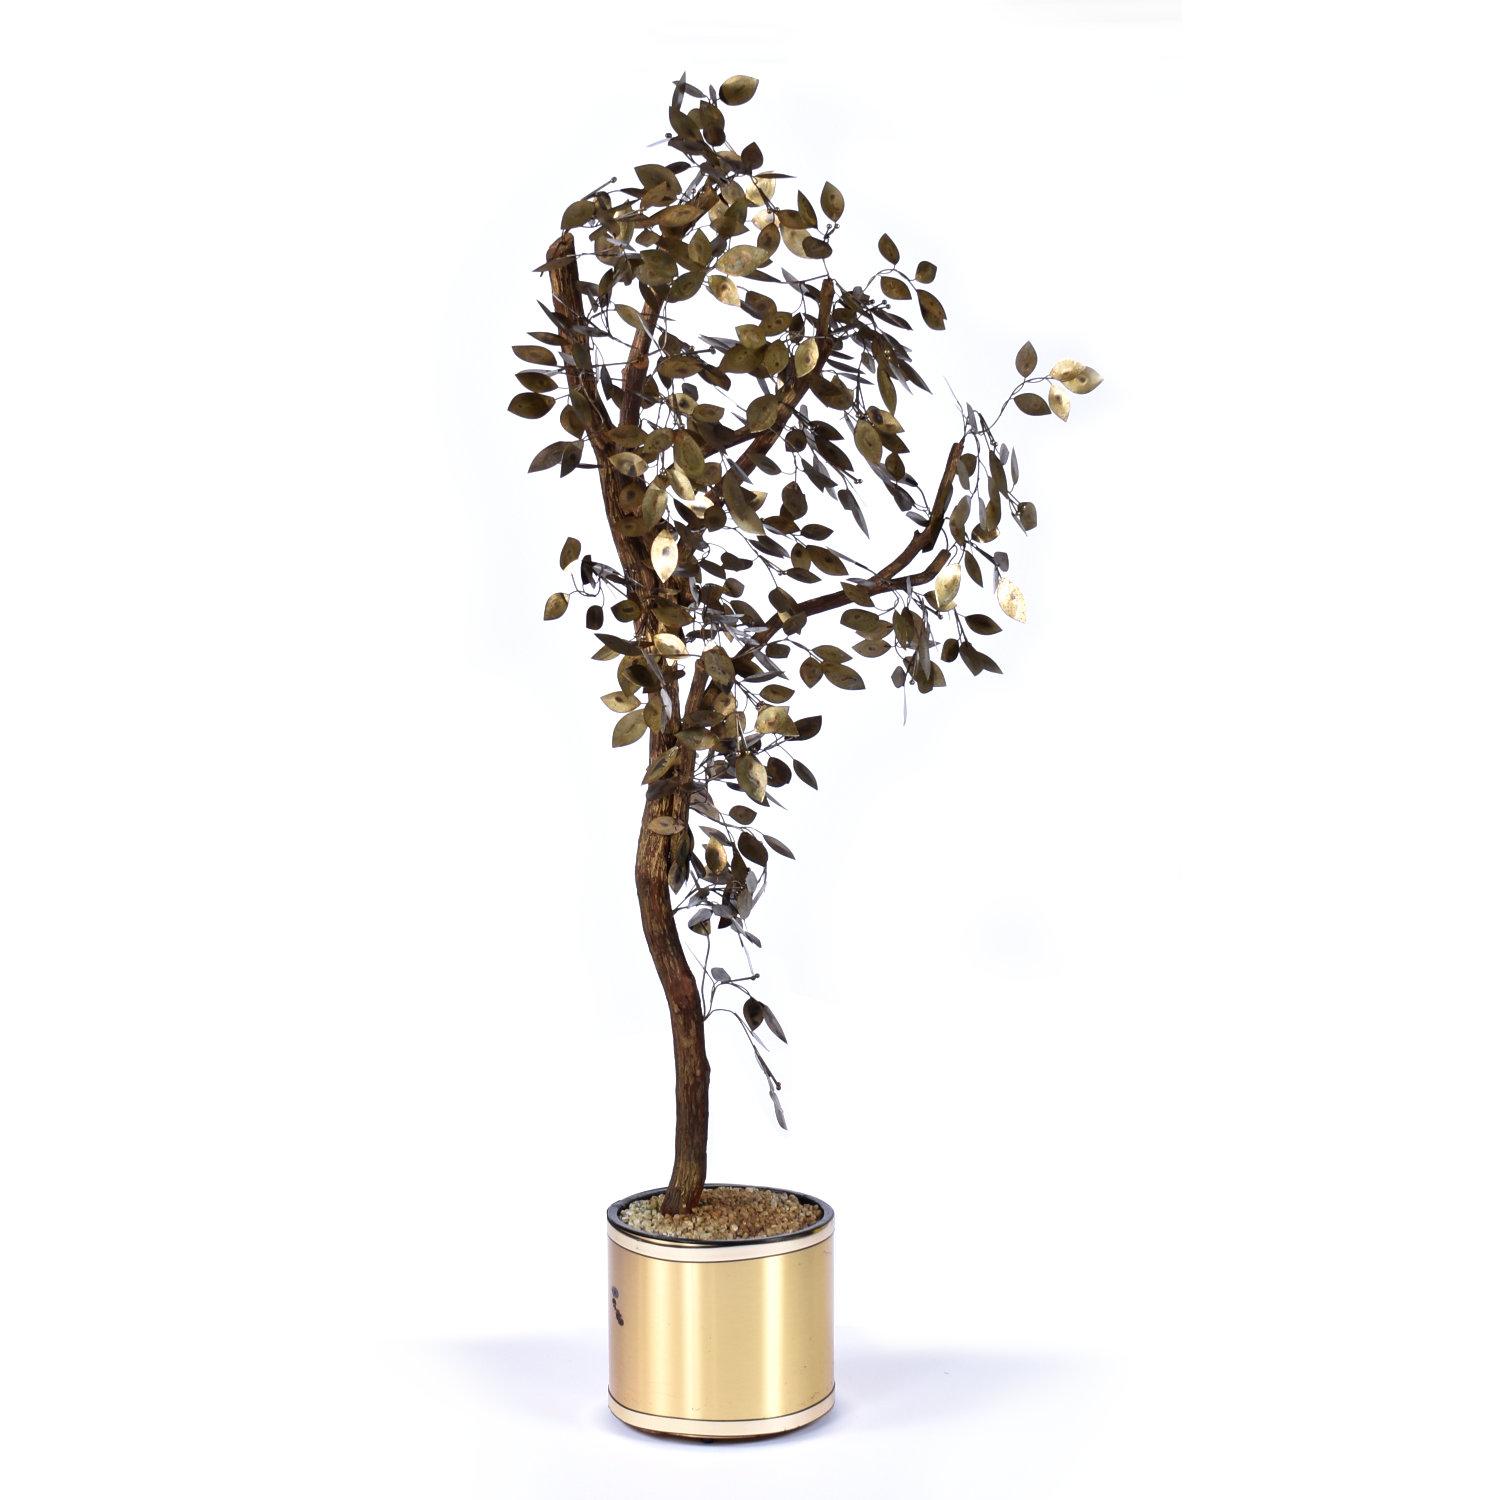 Fabulous vintage 1970s Curtis Jere style patinated brass decorative potted tree. The elegantly welded metal tree is quite large. The tree with pot reaches to 73? in height and nearly four feet wide! The tree is fixed in the accompanying gold